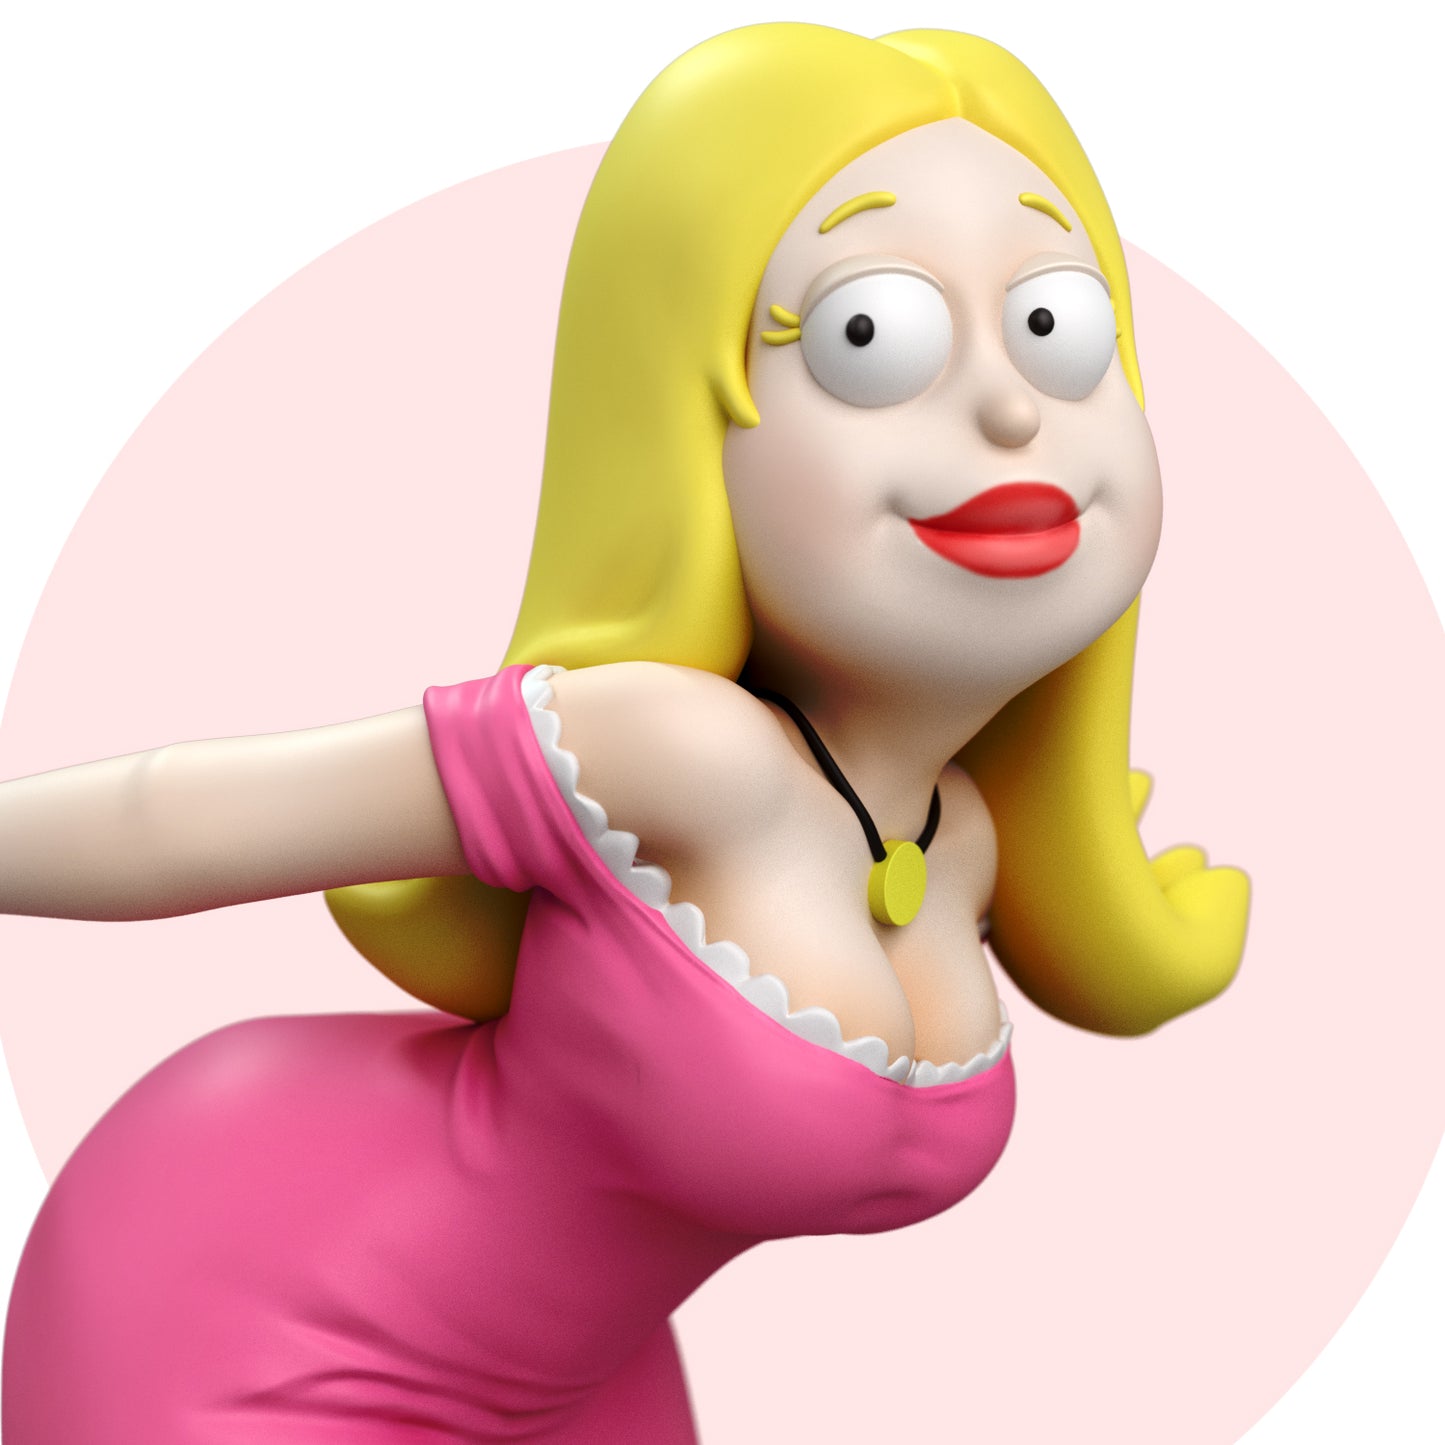 Fanart Blond Housewife PinUp Statuette